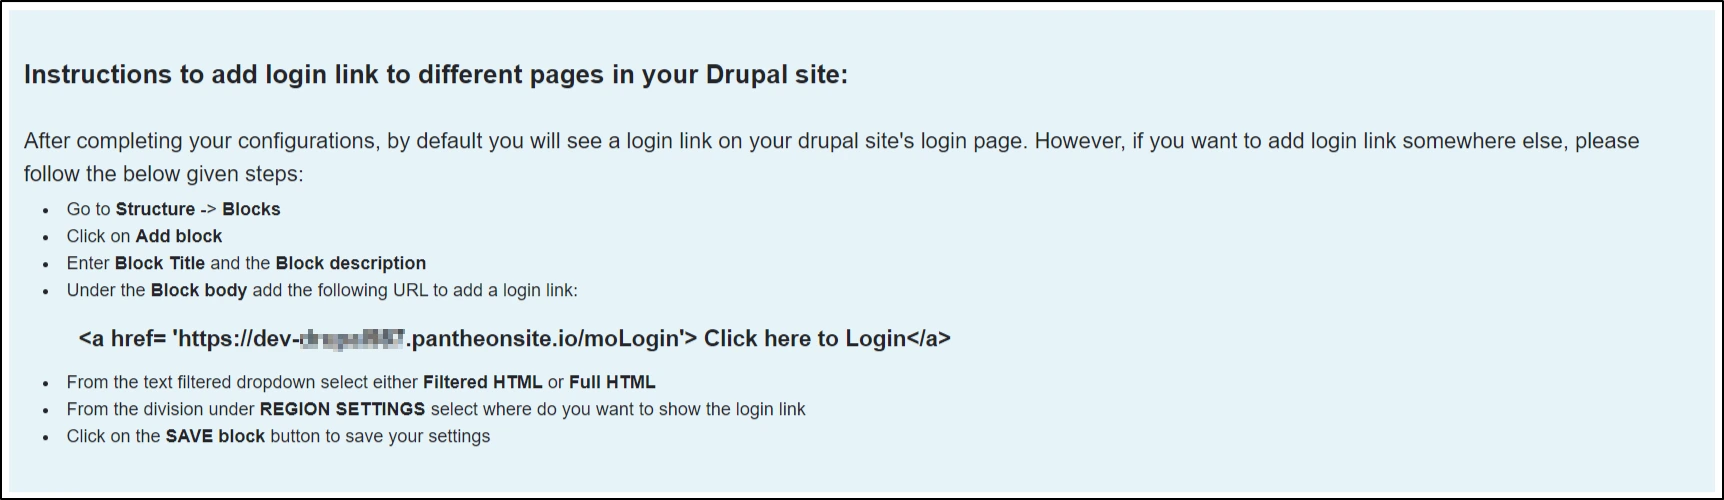 Drupal OAuth OpenID Single Single-On - Add login link into different page of the Drupal site 